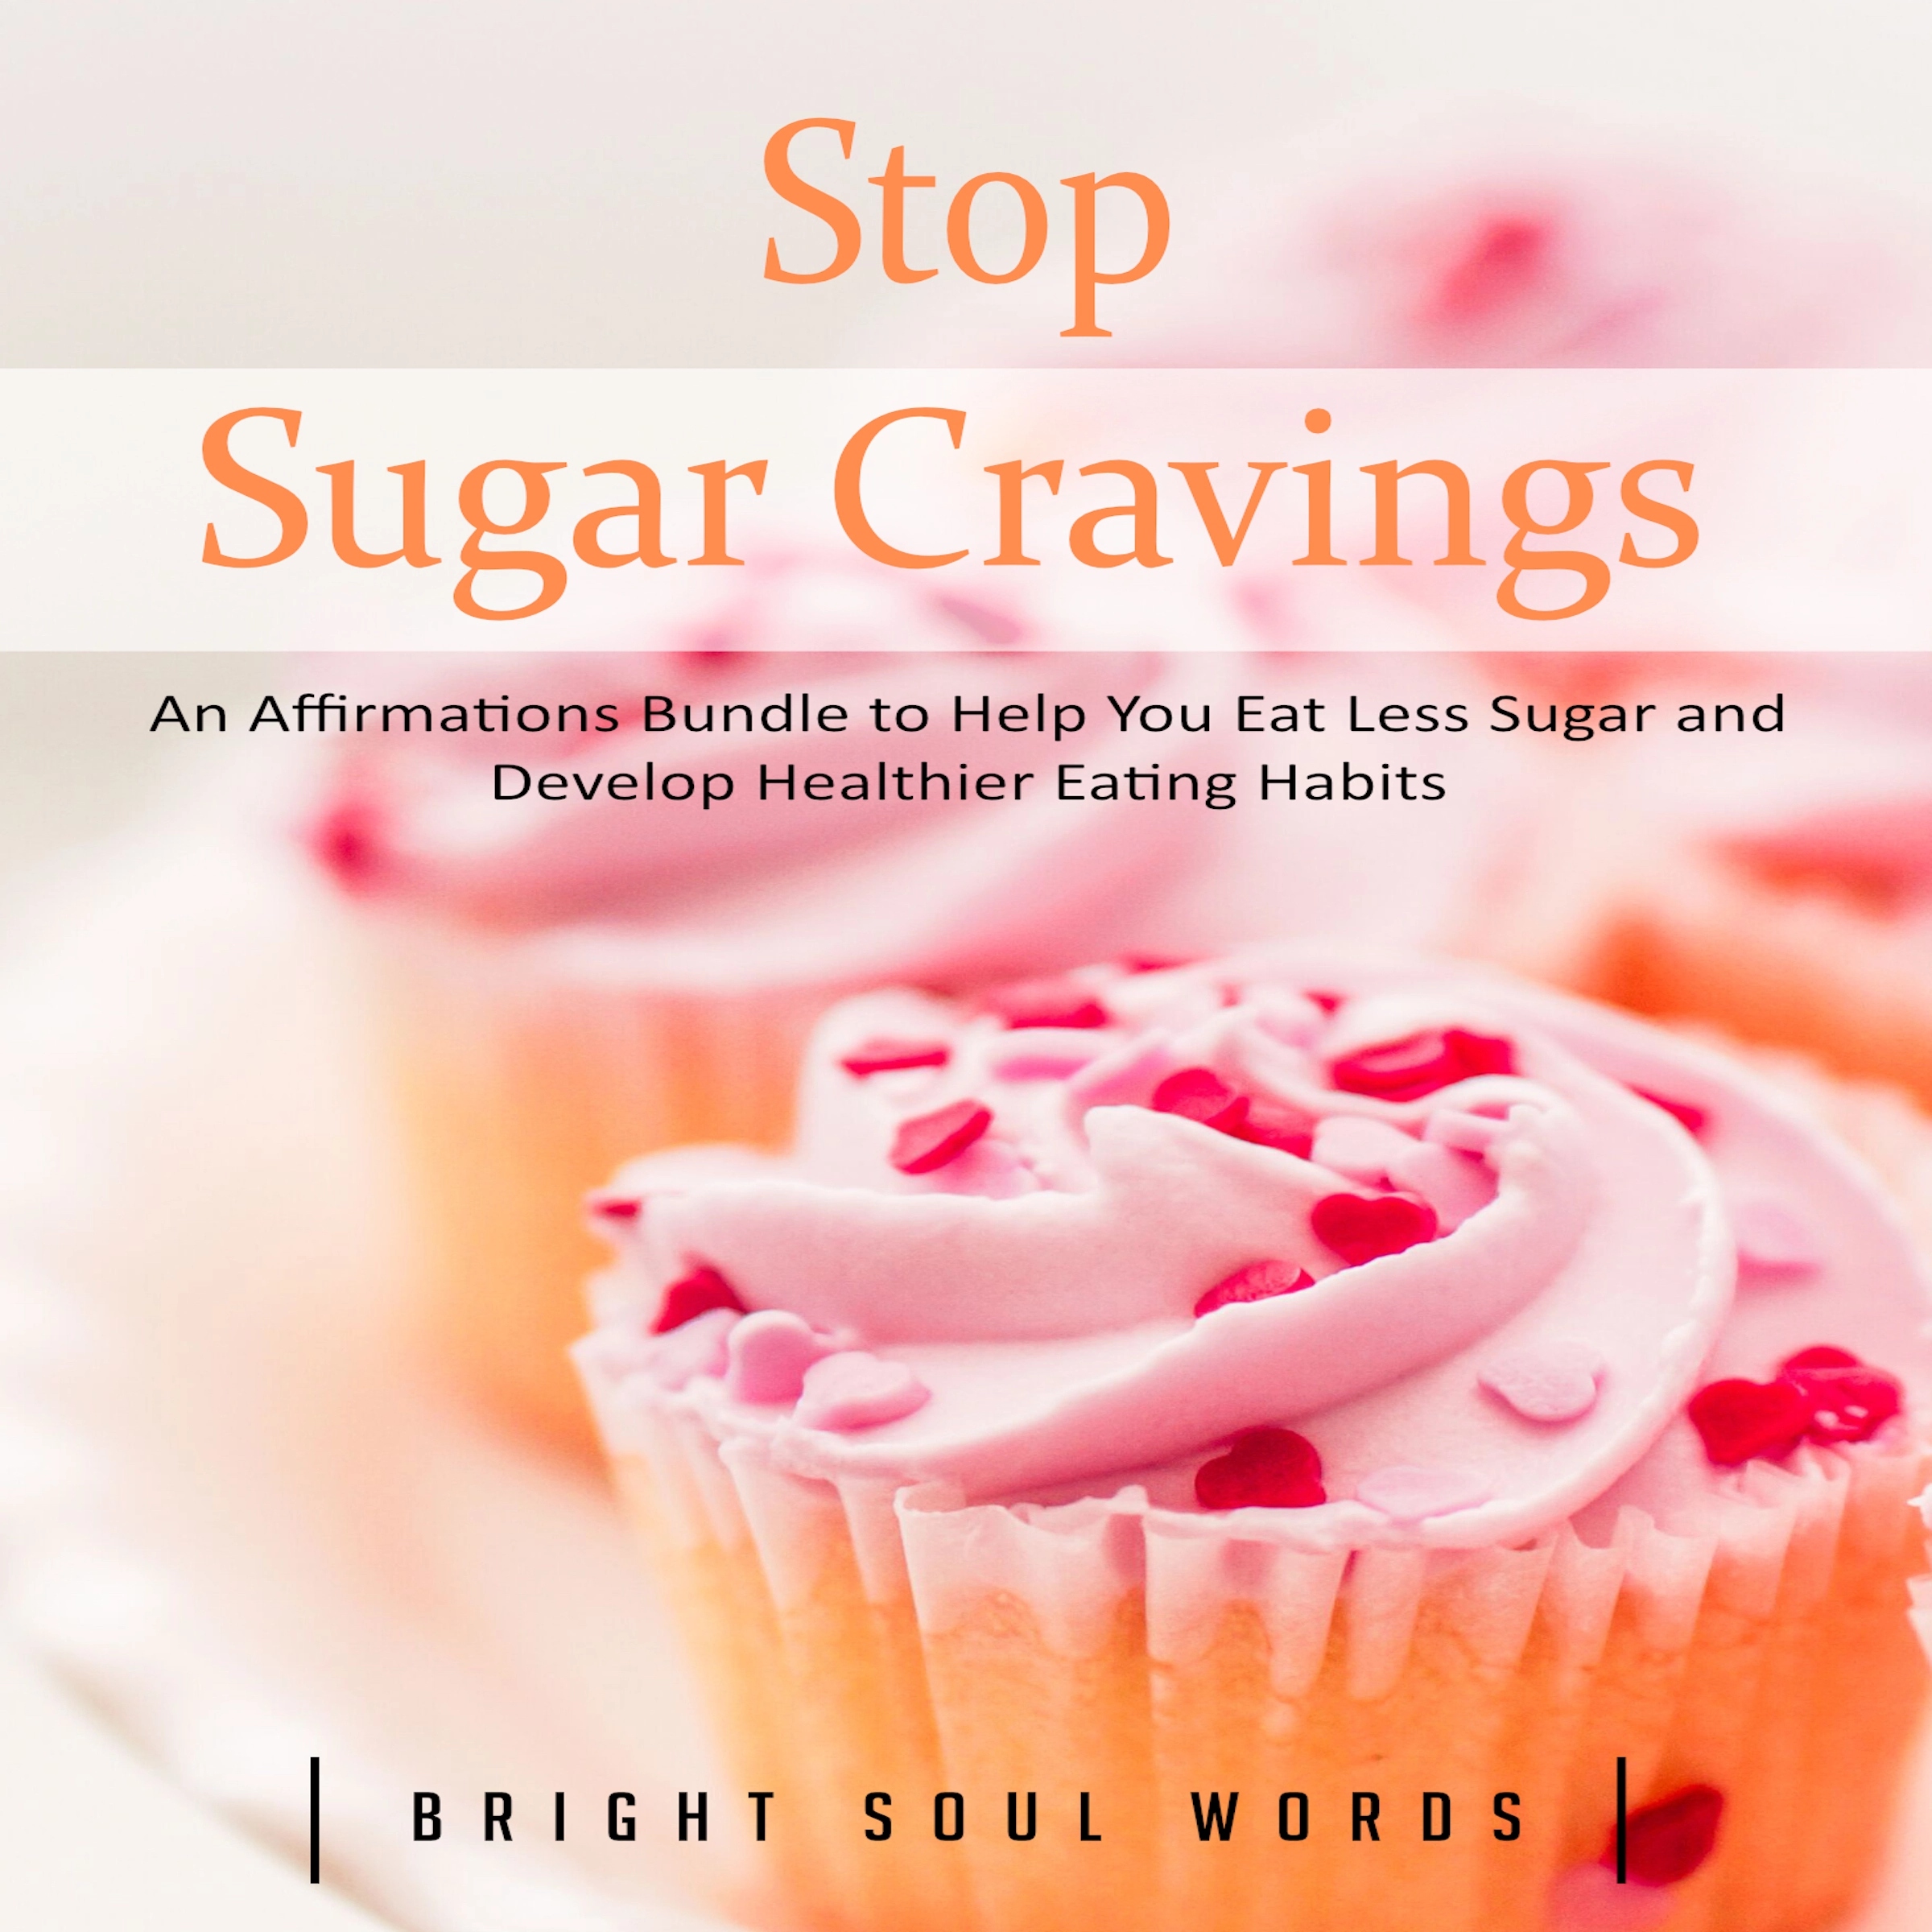 Stop Sugar Cravings: An Affirmations Bundle to Help You Eat Less Sugar and Develop Healthier Eating Habits Audiobook by Bright Soul Words